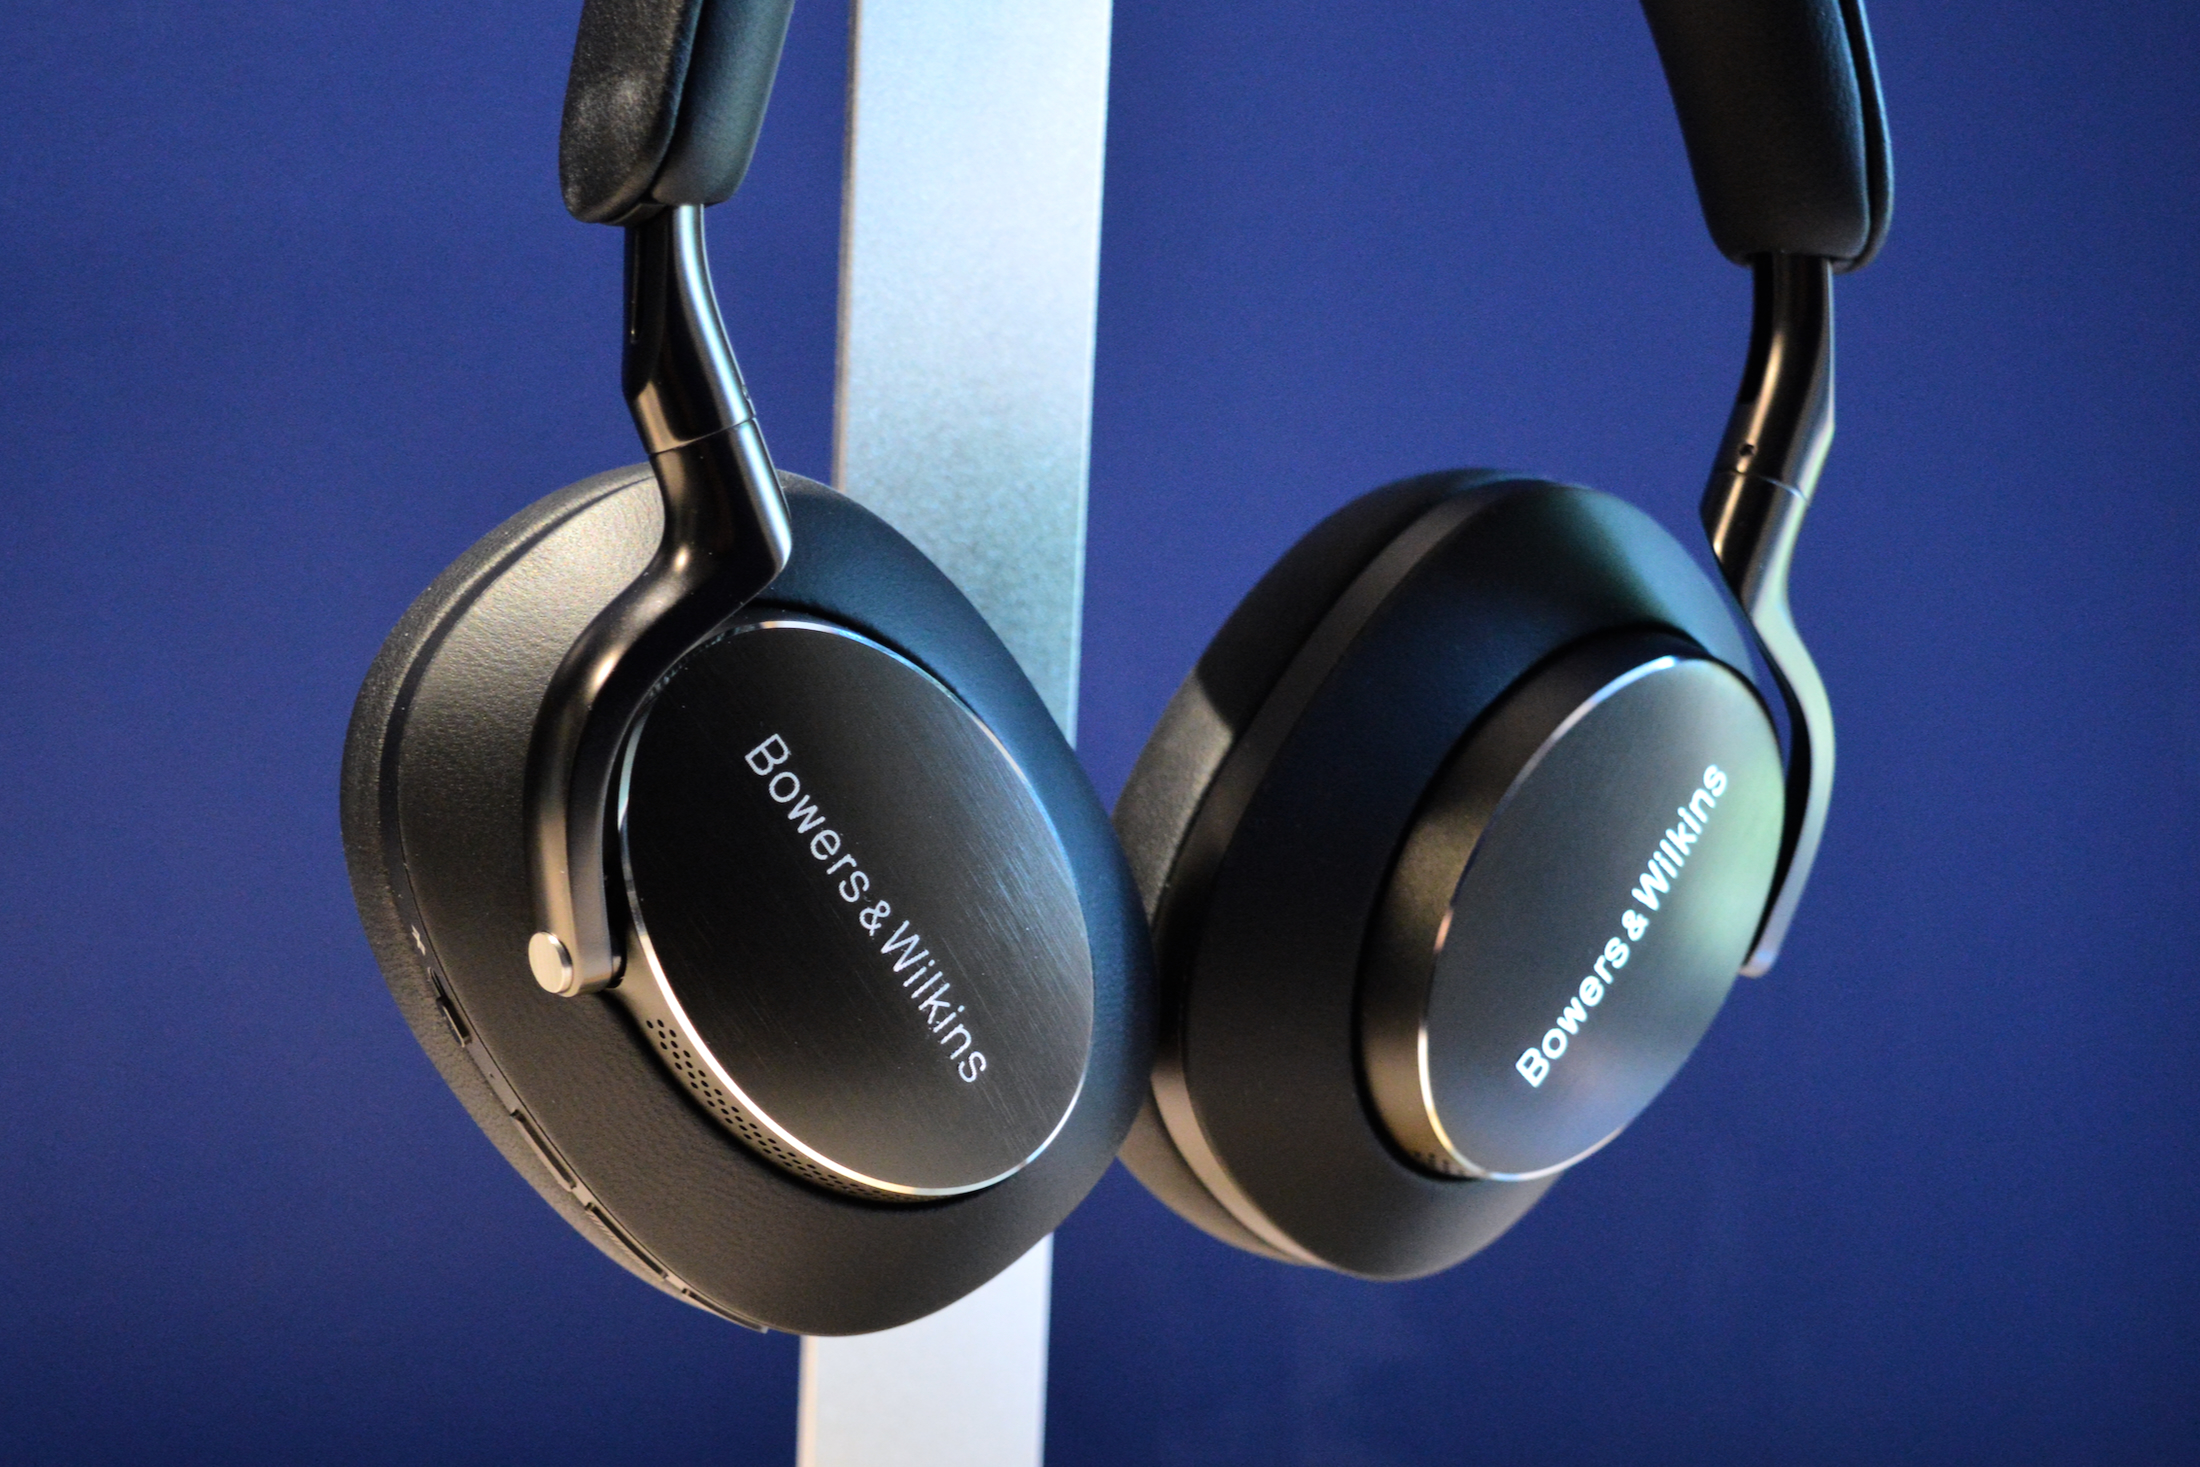 Bowers & Wilkins Px8 wireless over-ear noise-canceling headphone review